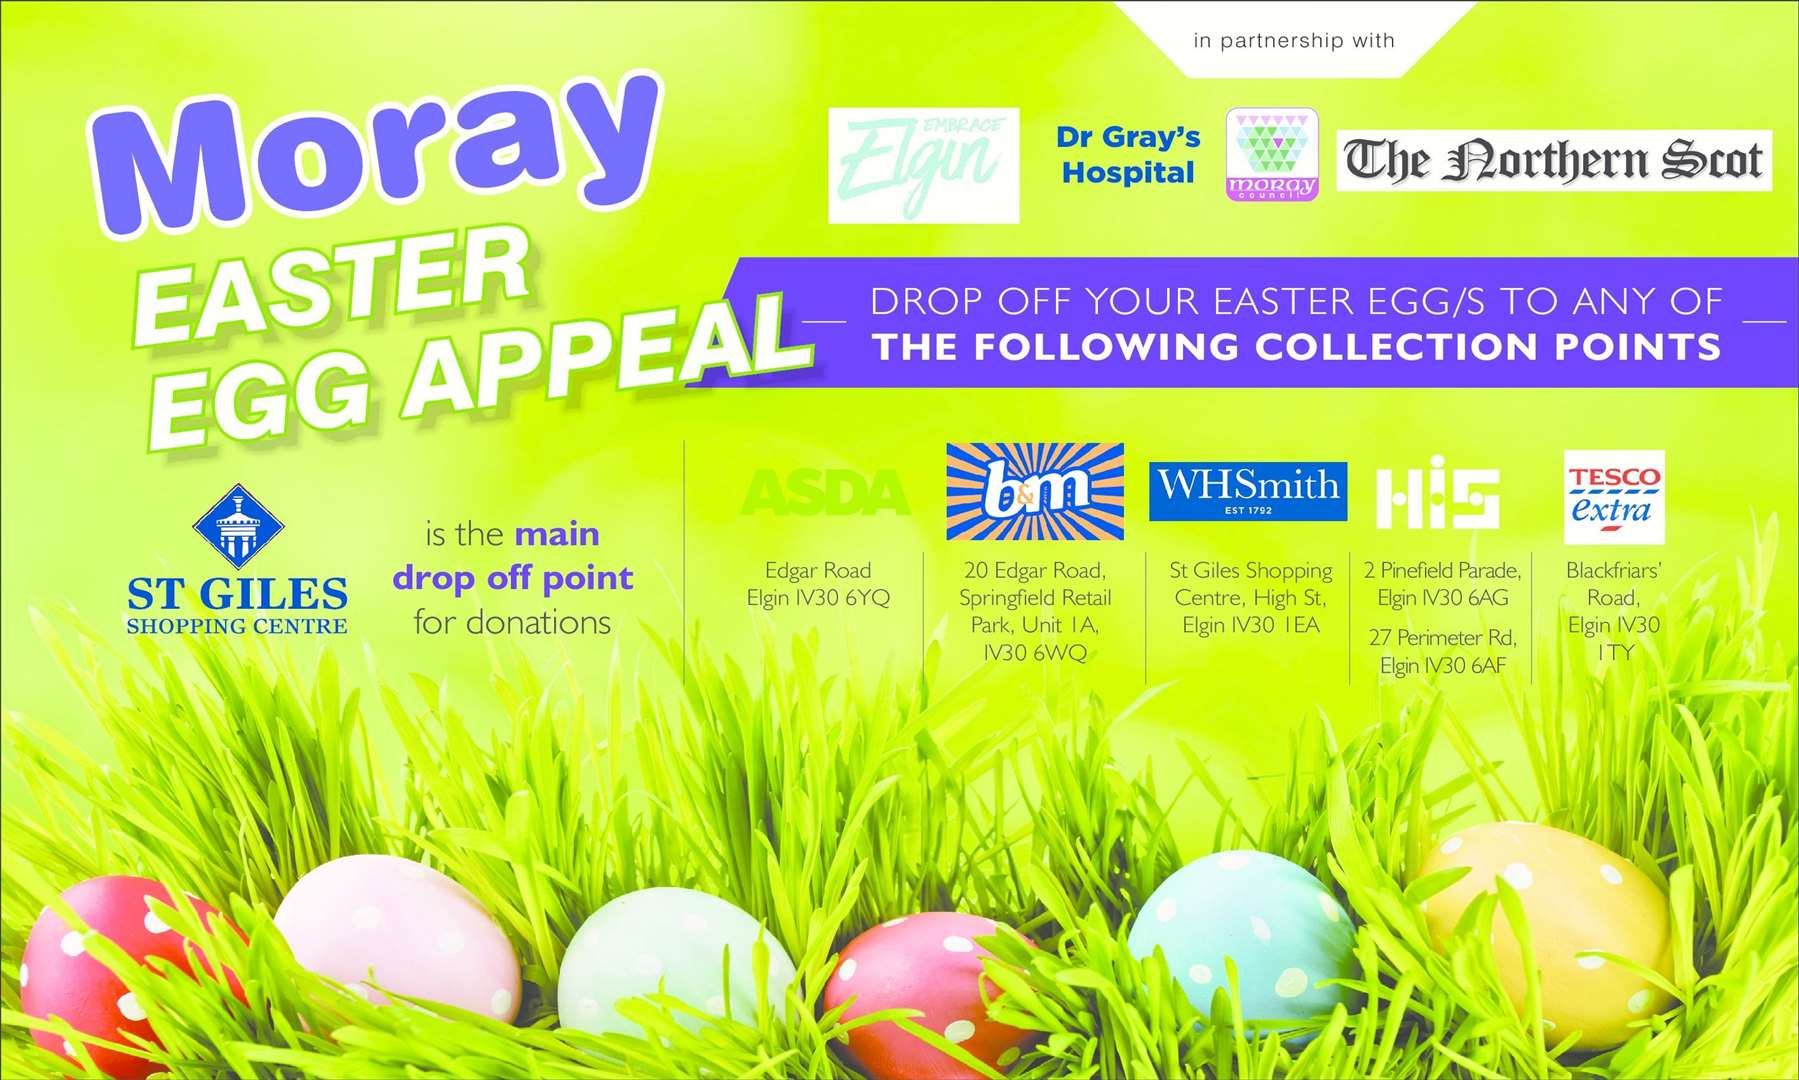 The Easter appeal is about giving people the feelgood factor.